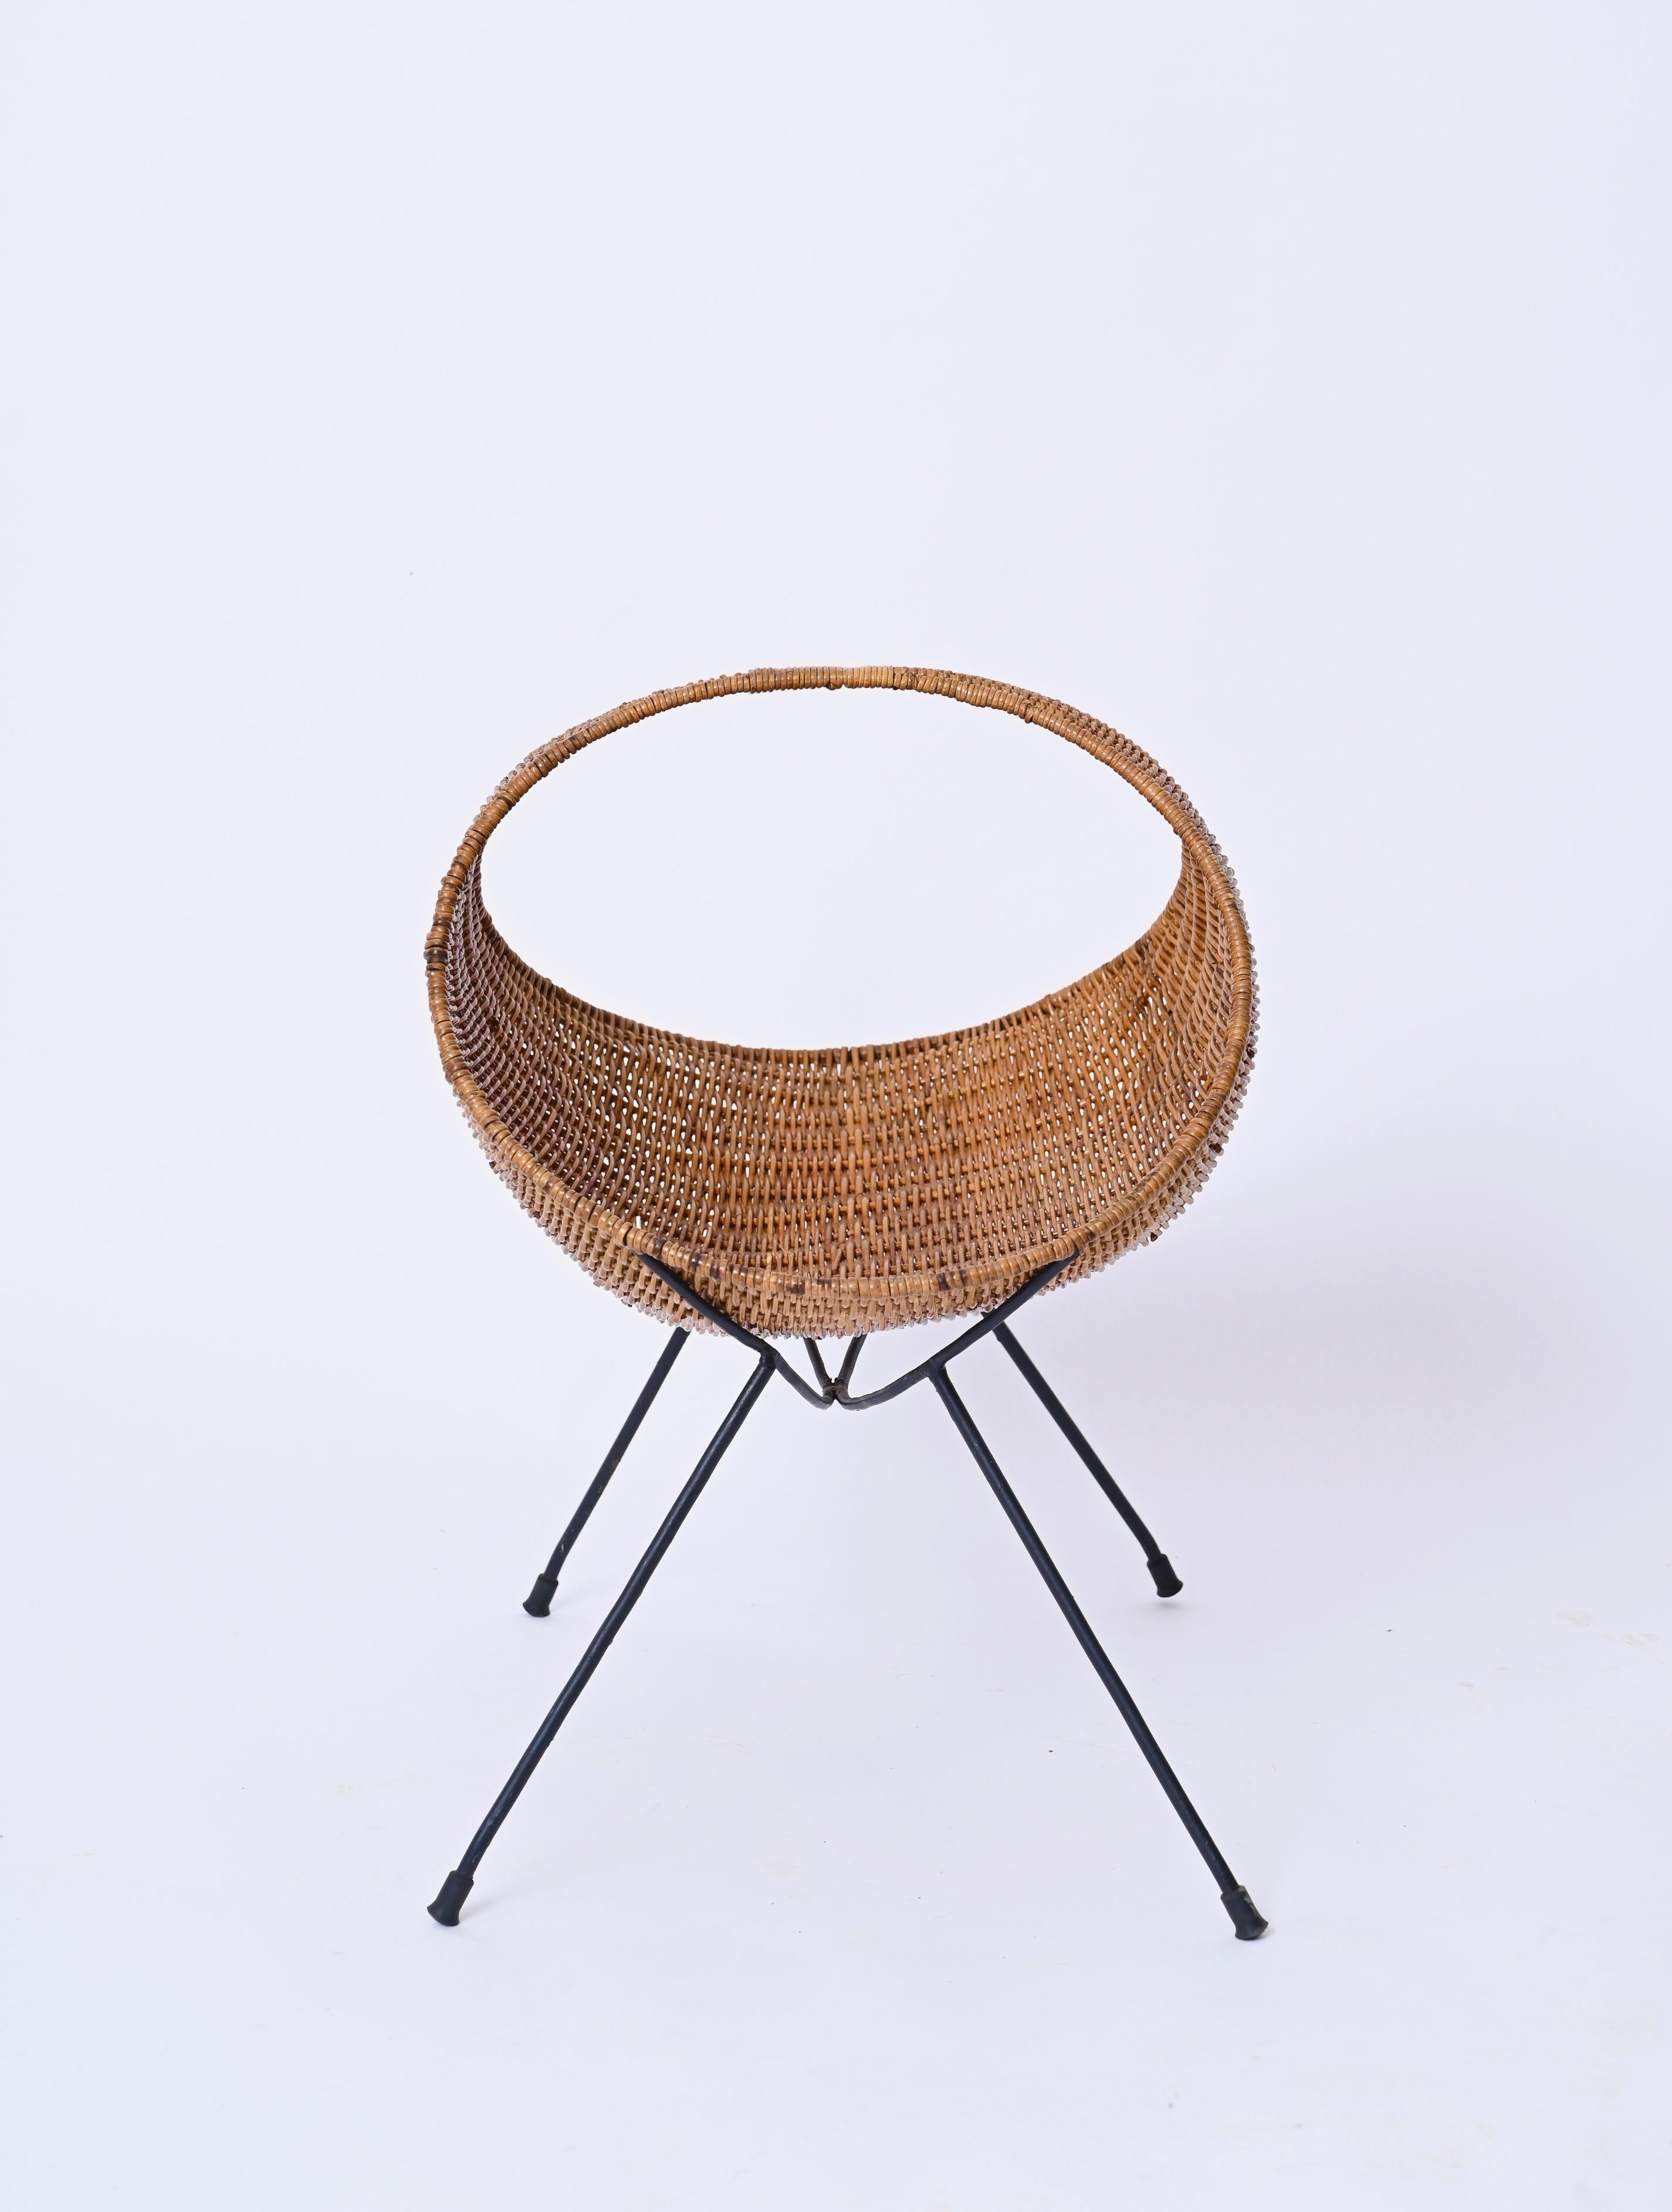 Campo & Graffi Magazine Rack in Wicker and Black Enameled Iron, Italy 1950s For Sale 5